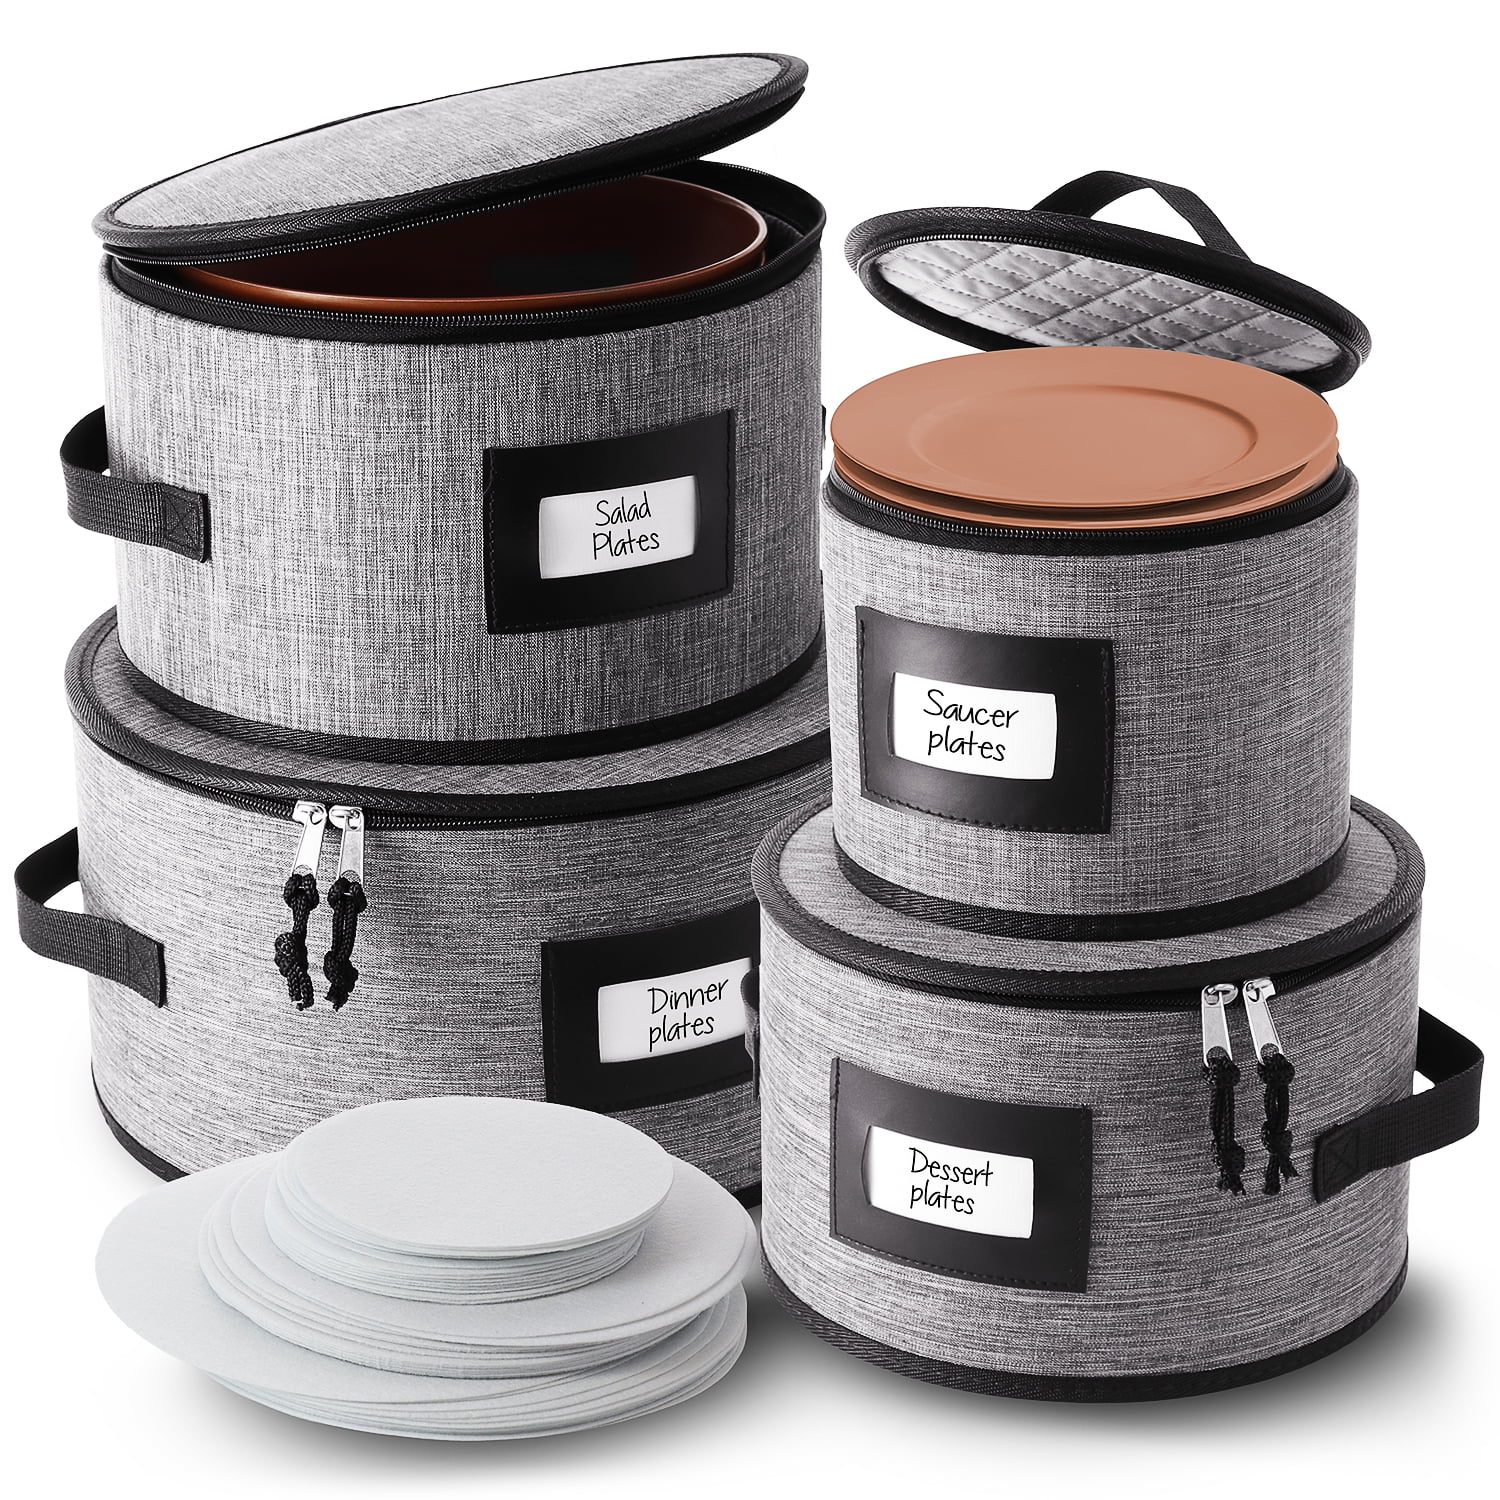 Hearth & Harbor China Plate Storage, Padded Dinnerware Storage Dish Containers for Plates (4pc), Size: Plates Storage